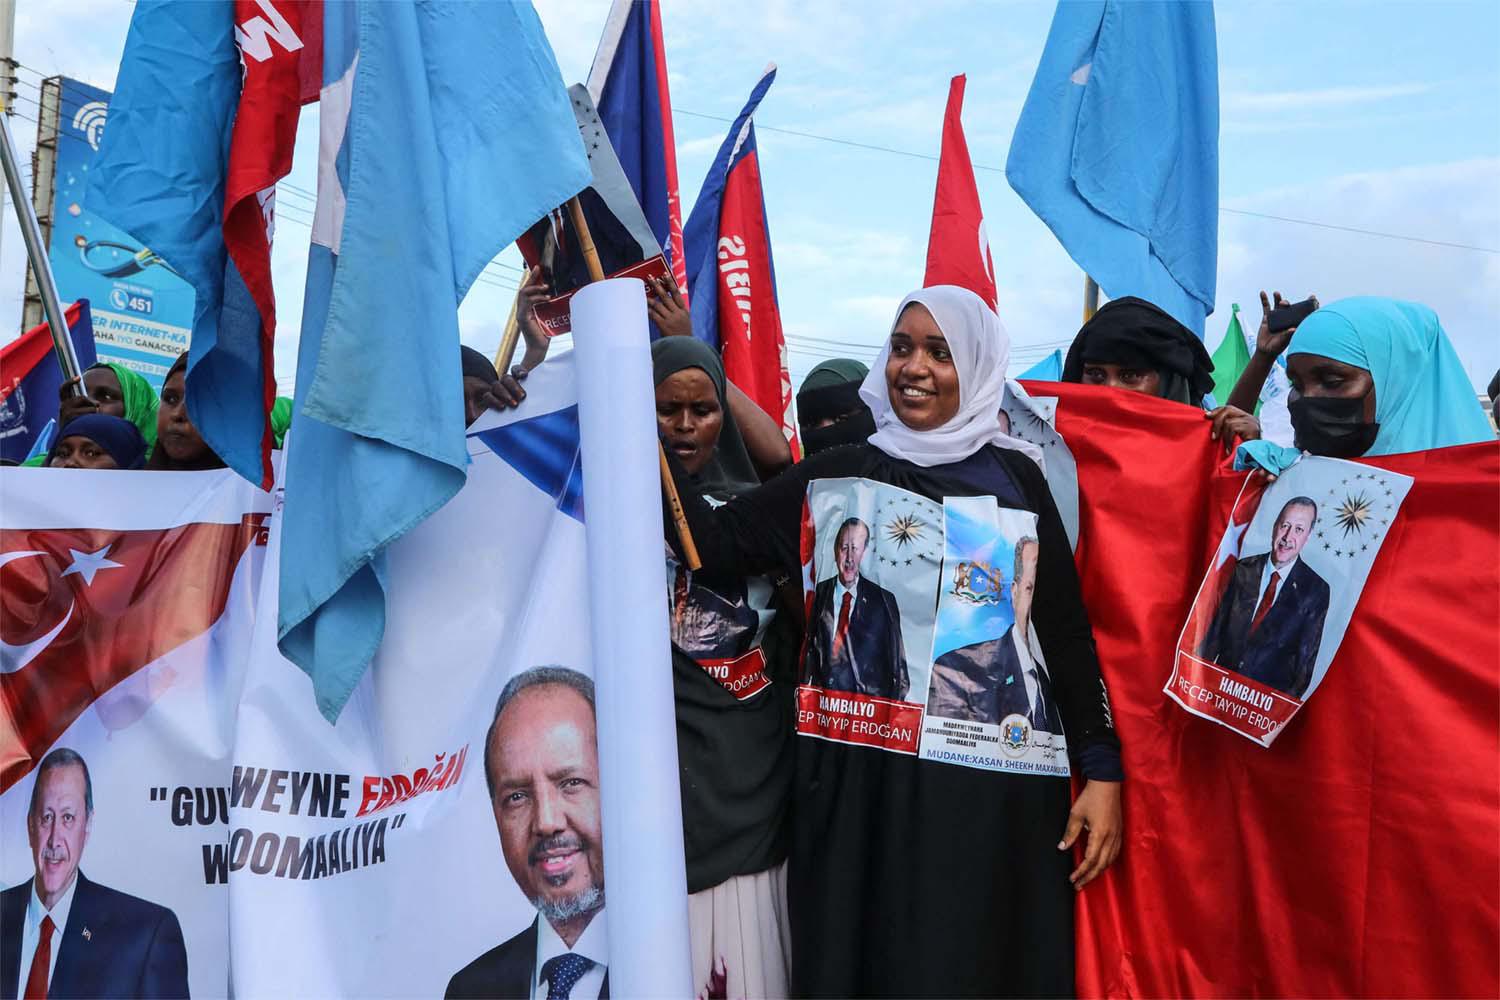 Turkey has become a close ally of the Somali government in recent years